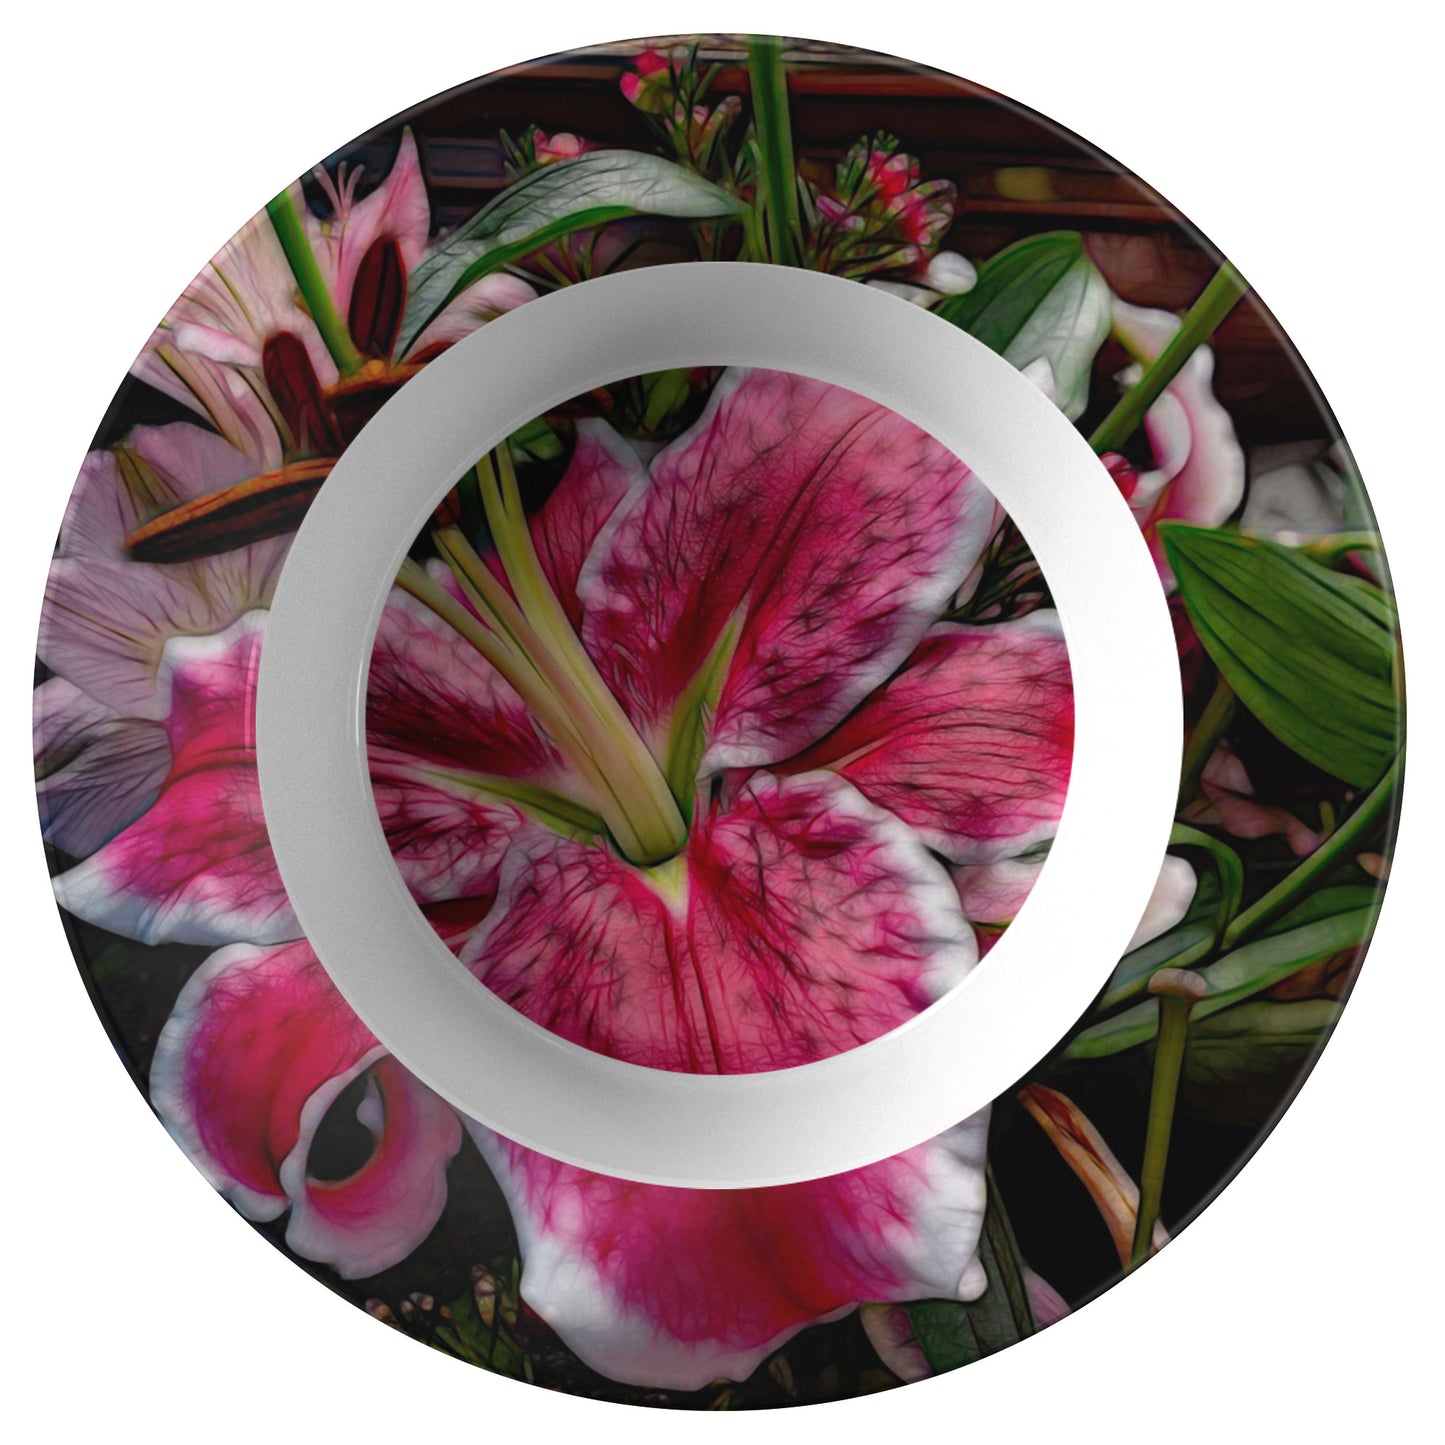 Big Petaled Pink and White Lily Dinner Bowl